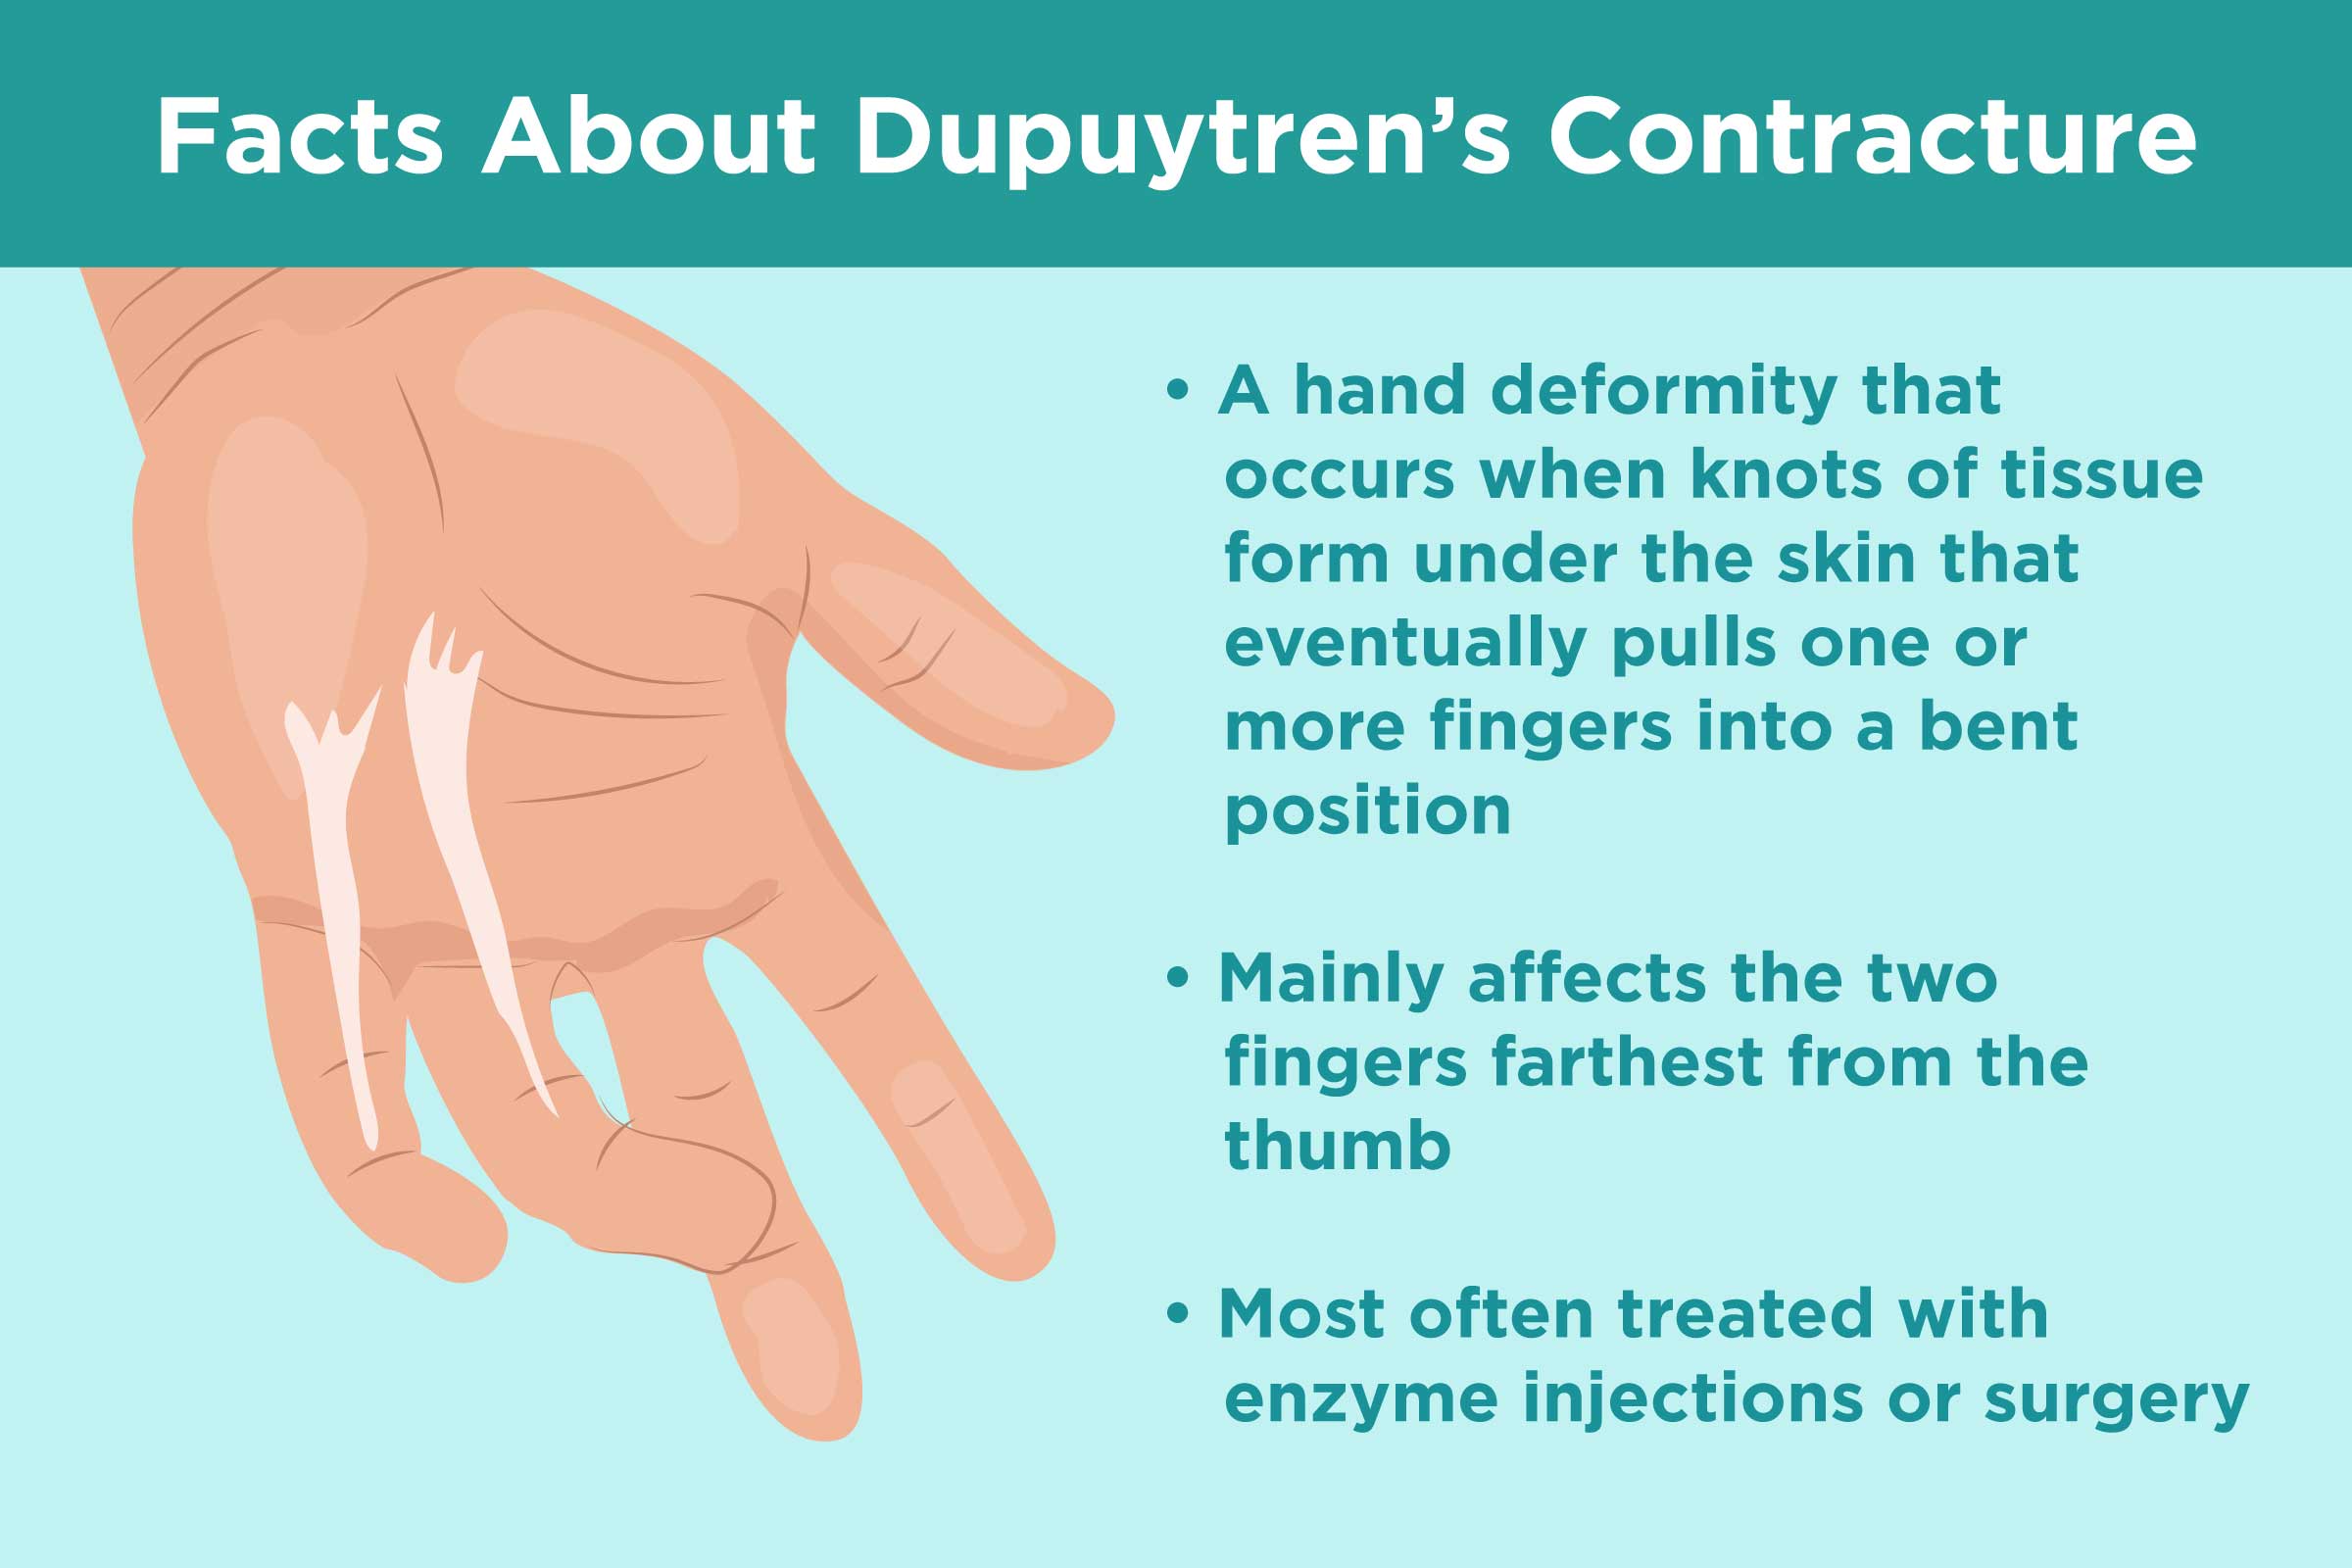 What Are Viking Fingers?, Dupuytren's Contracture